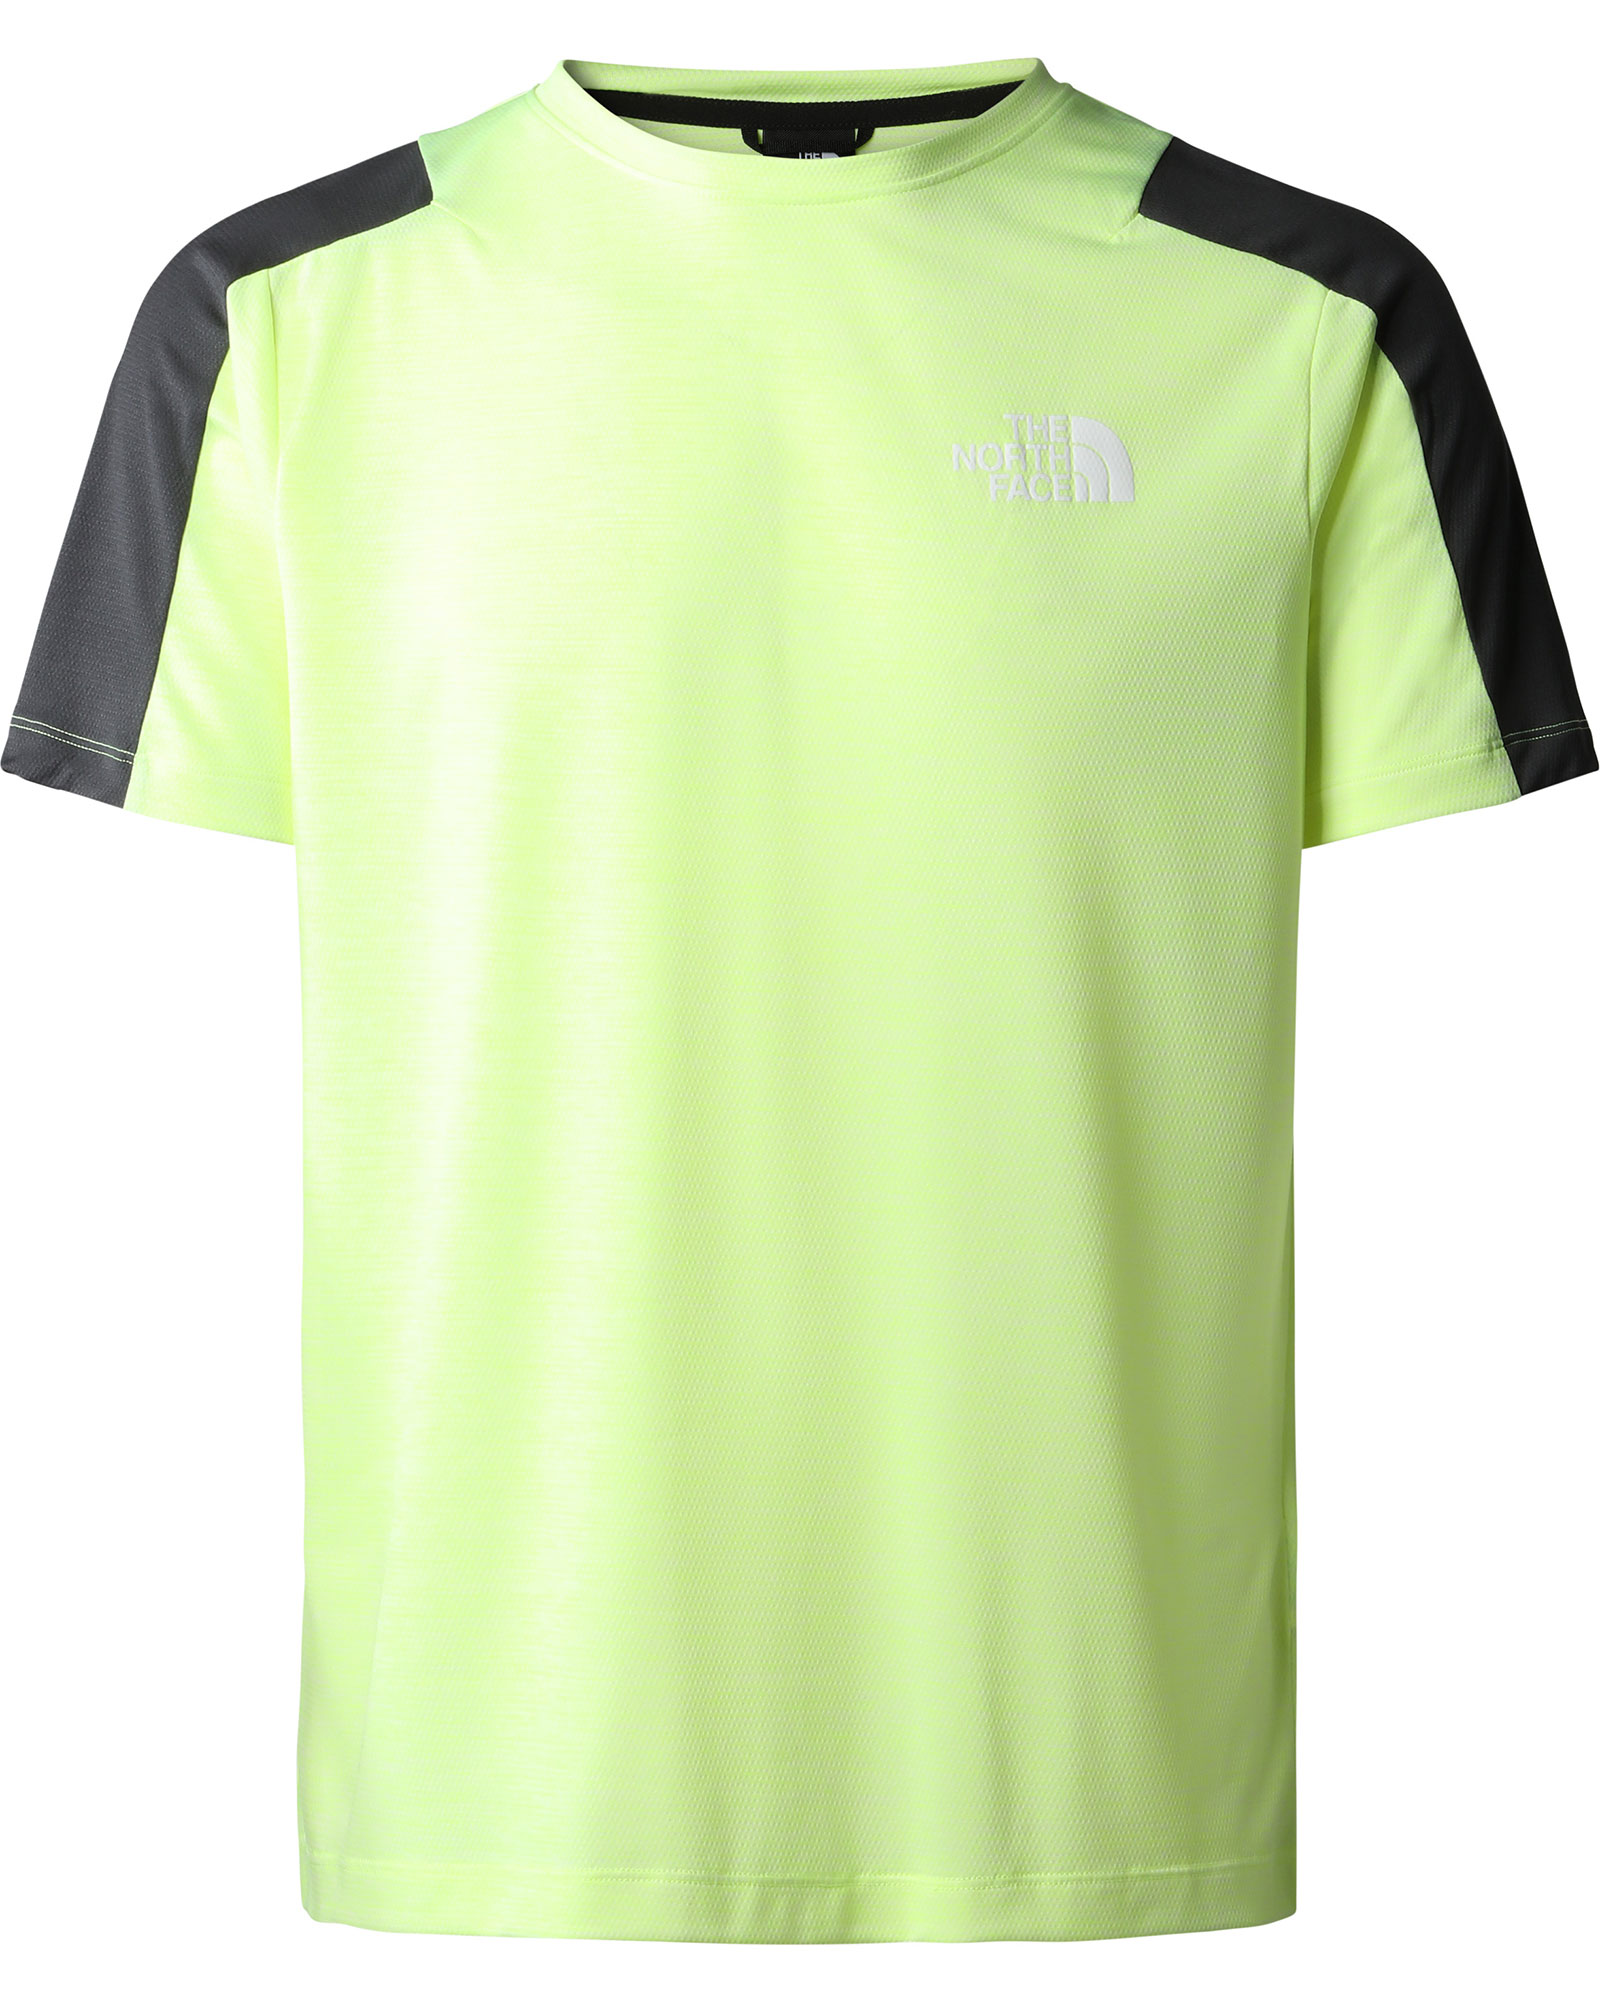 The North Face Men’s MA T Shirt - LED Yellow White Heather XS